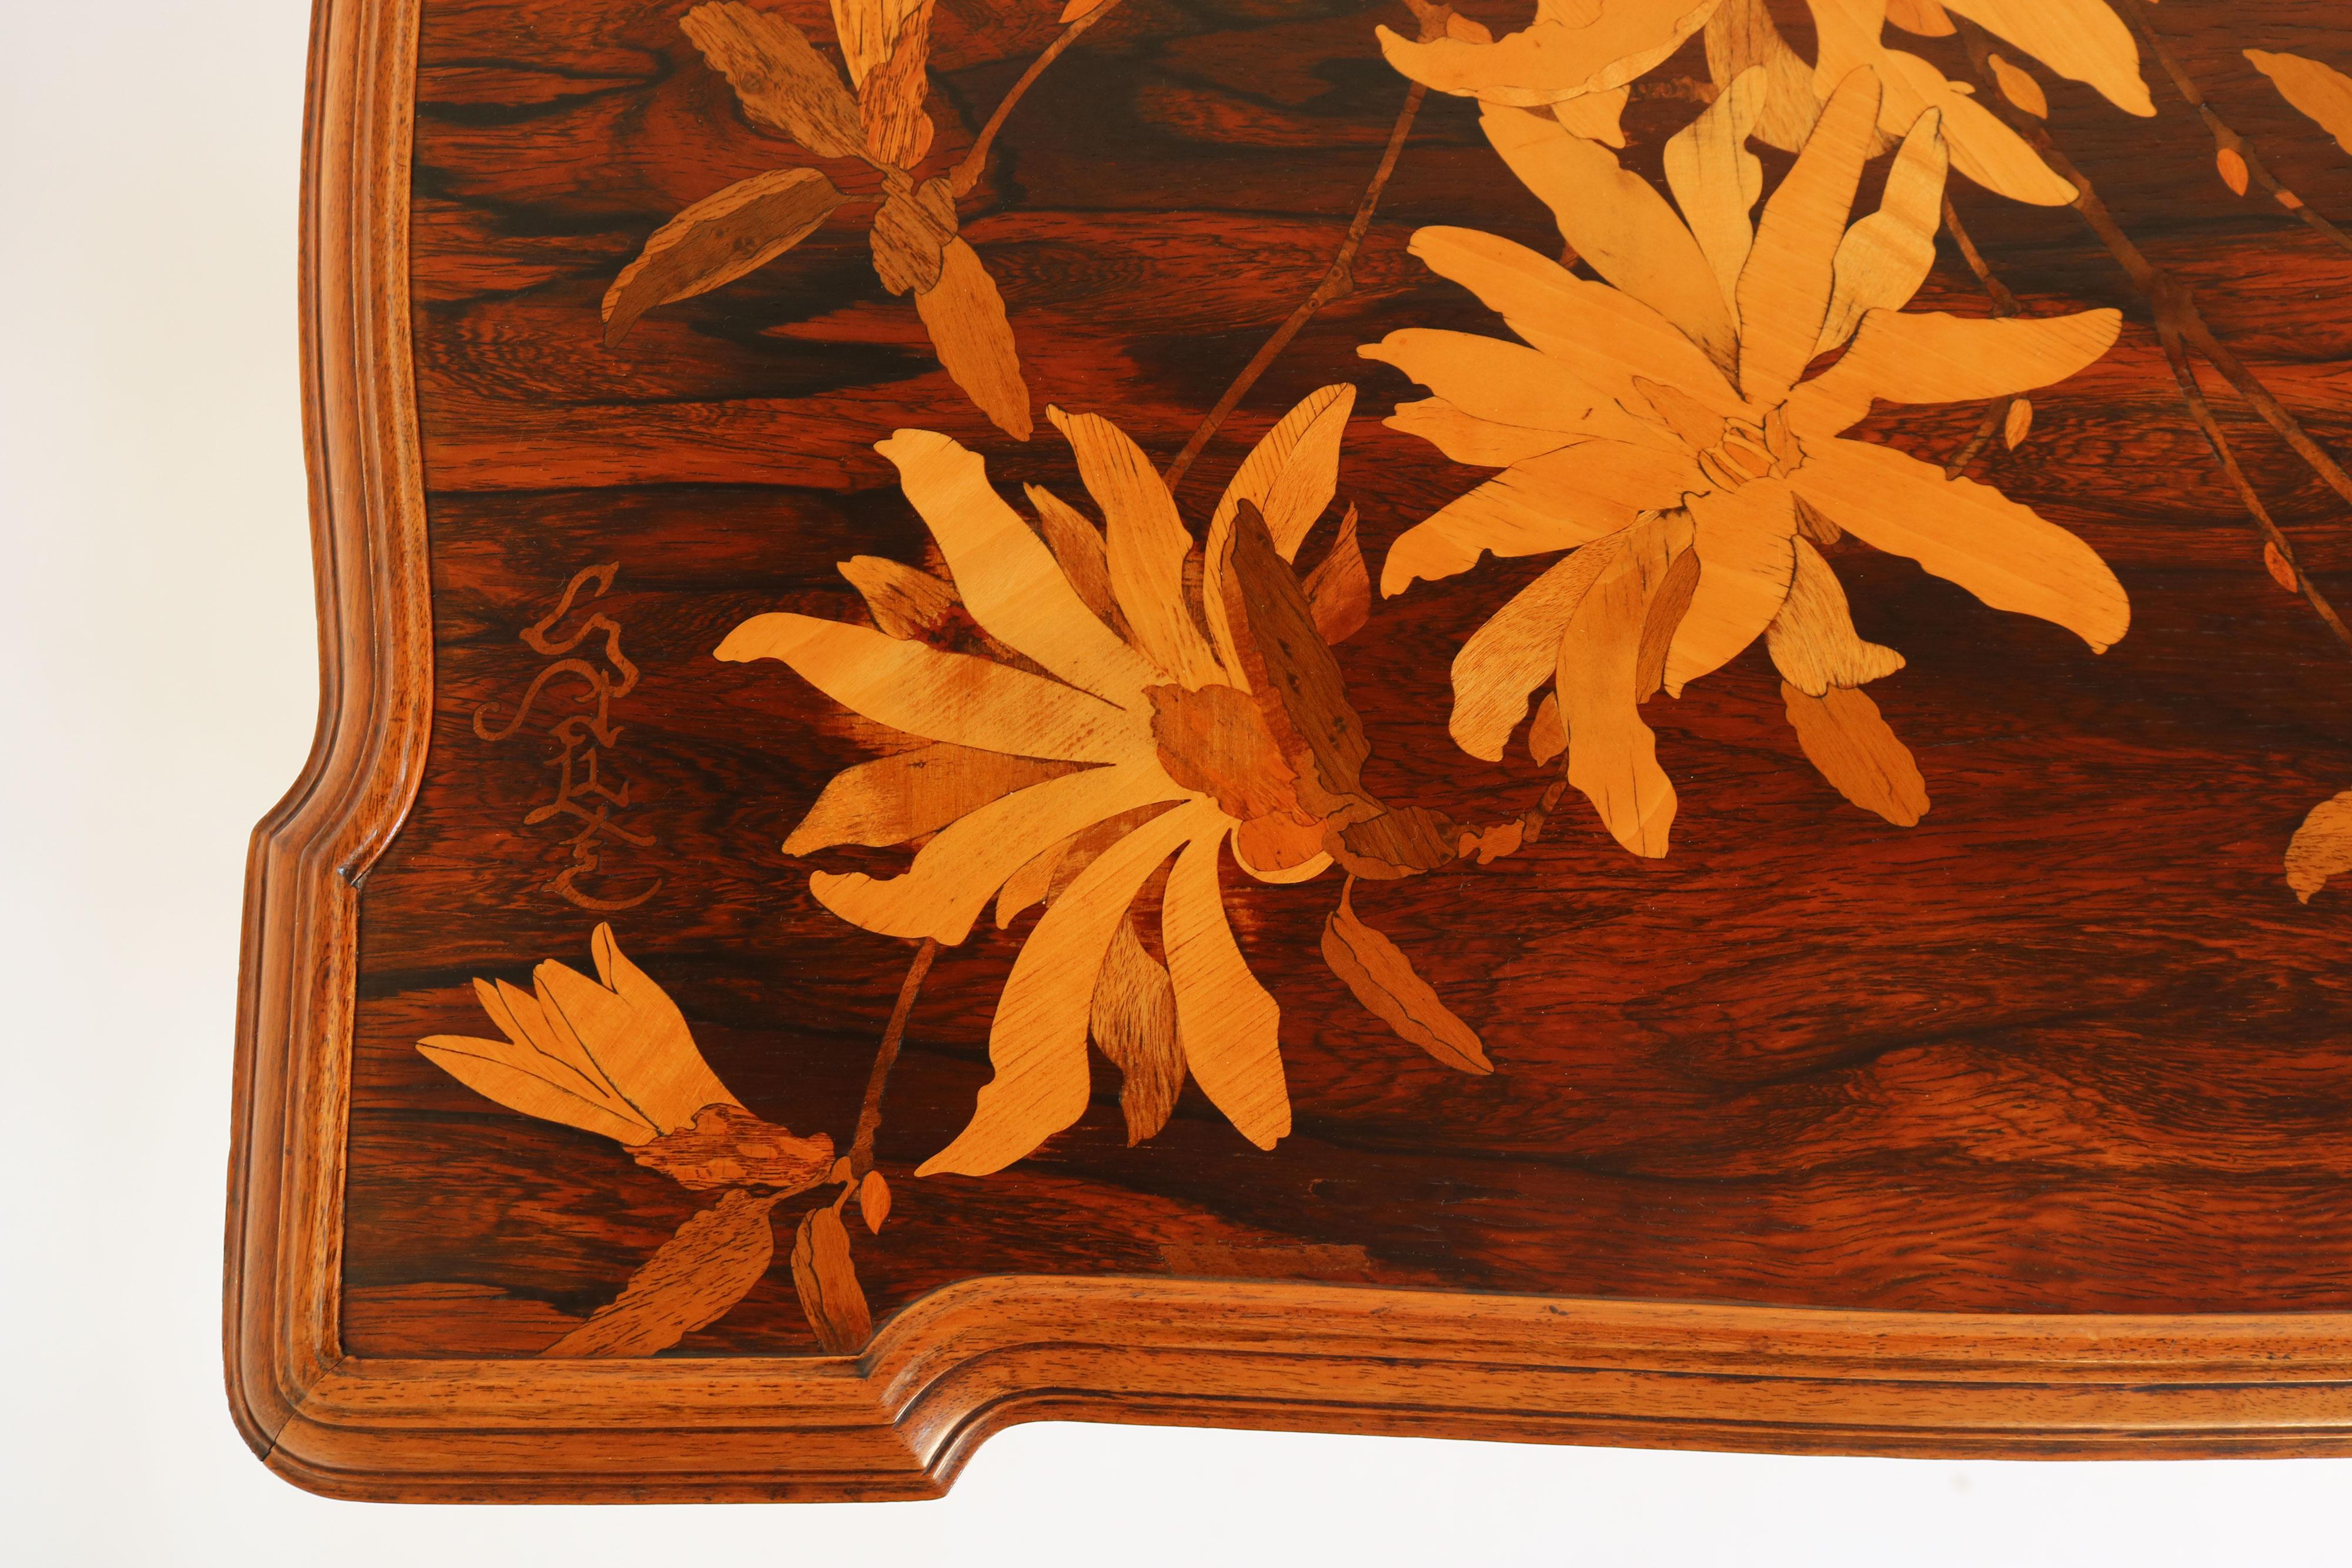 Very rare original Emile Galle ''plate 66 Japonisme'' side table in Art Nouveau style. 
This beautiful side table was created by Emile Galle in 1900, during the art nouveau period. It features exquisite marquetry woodwork that is inspired by the